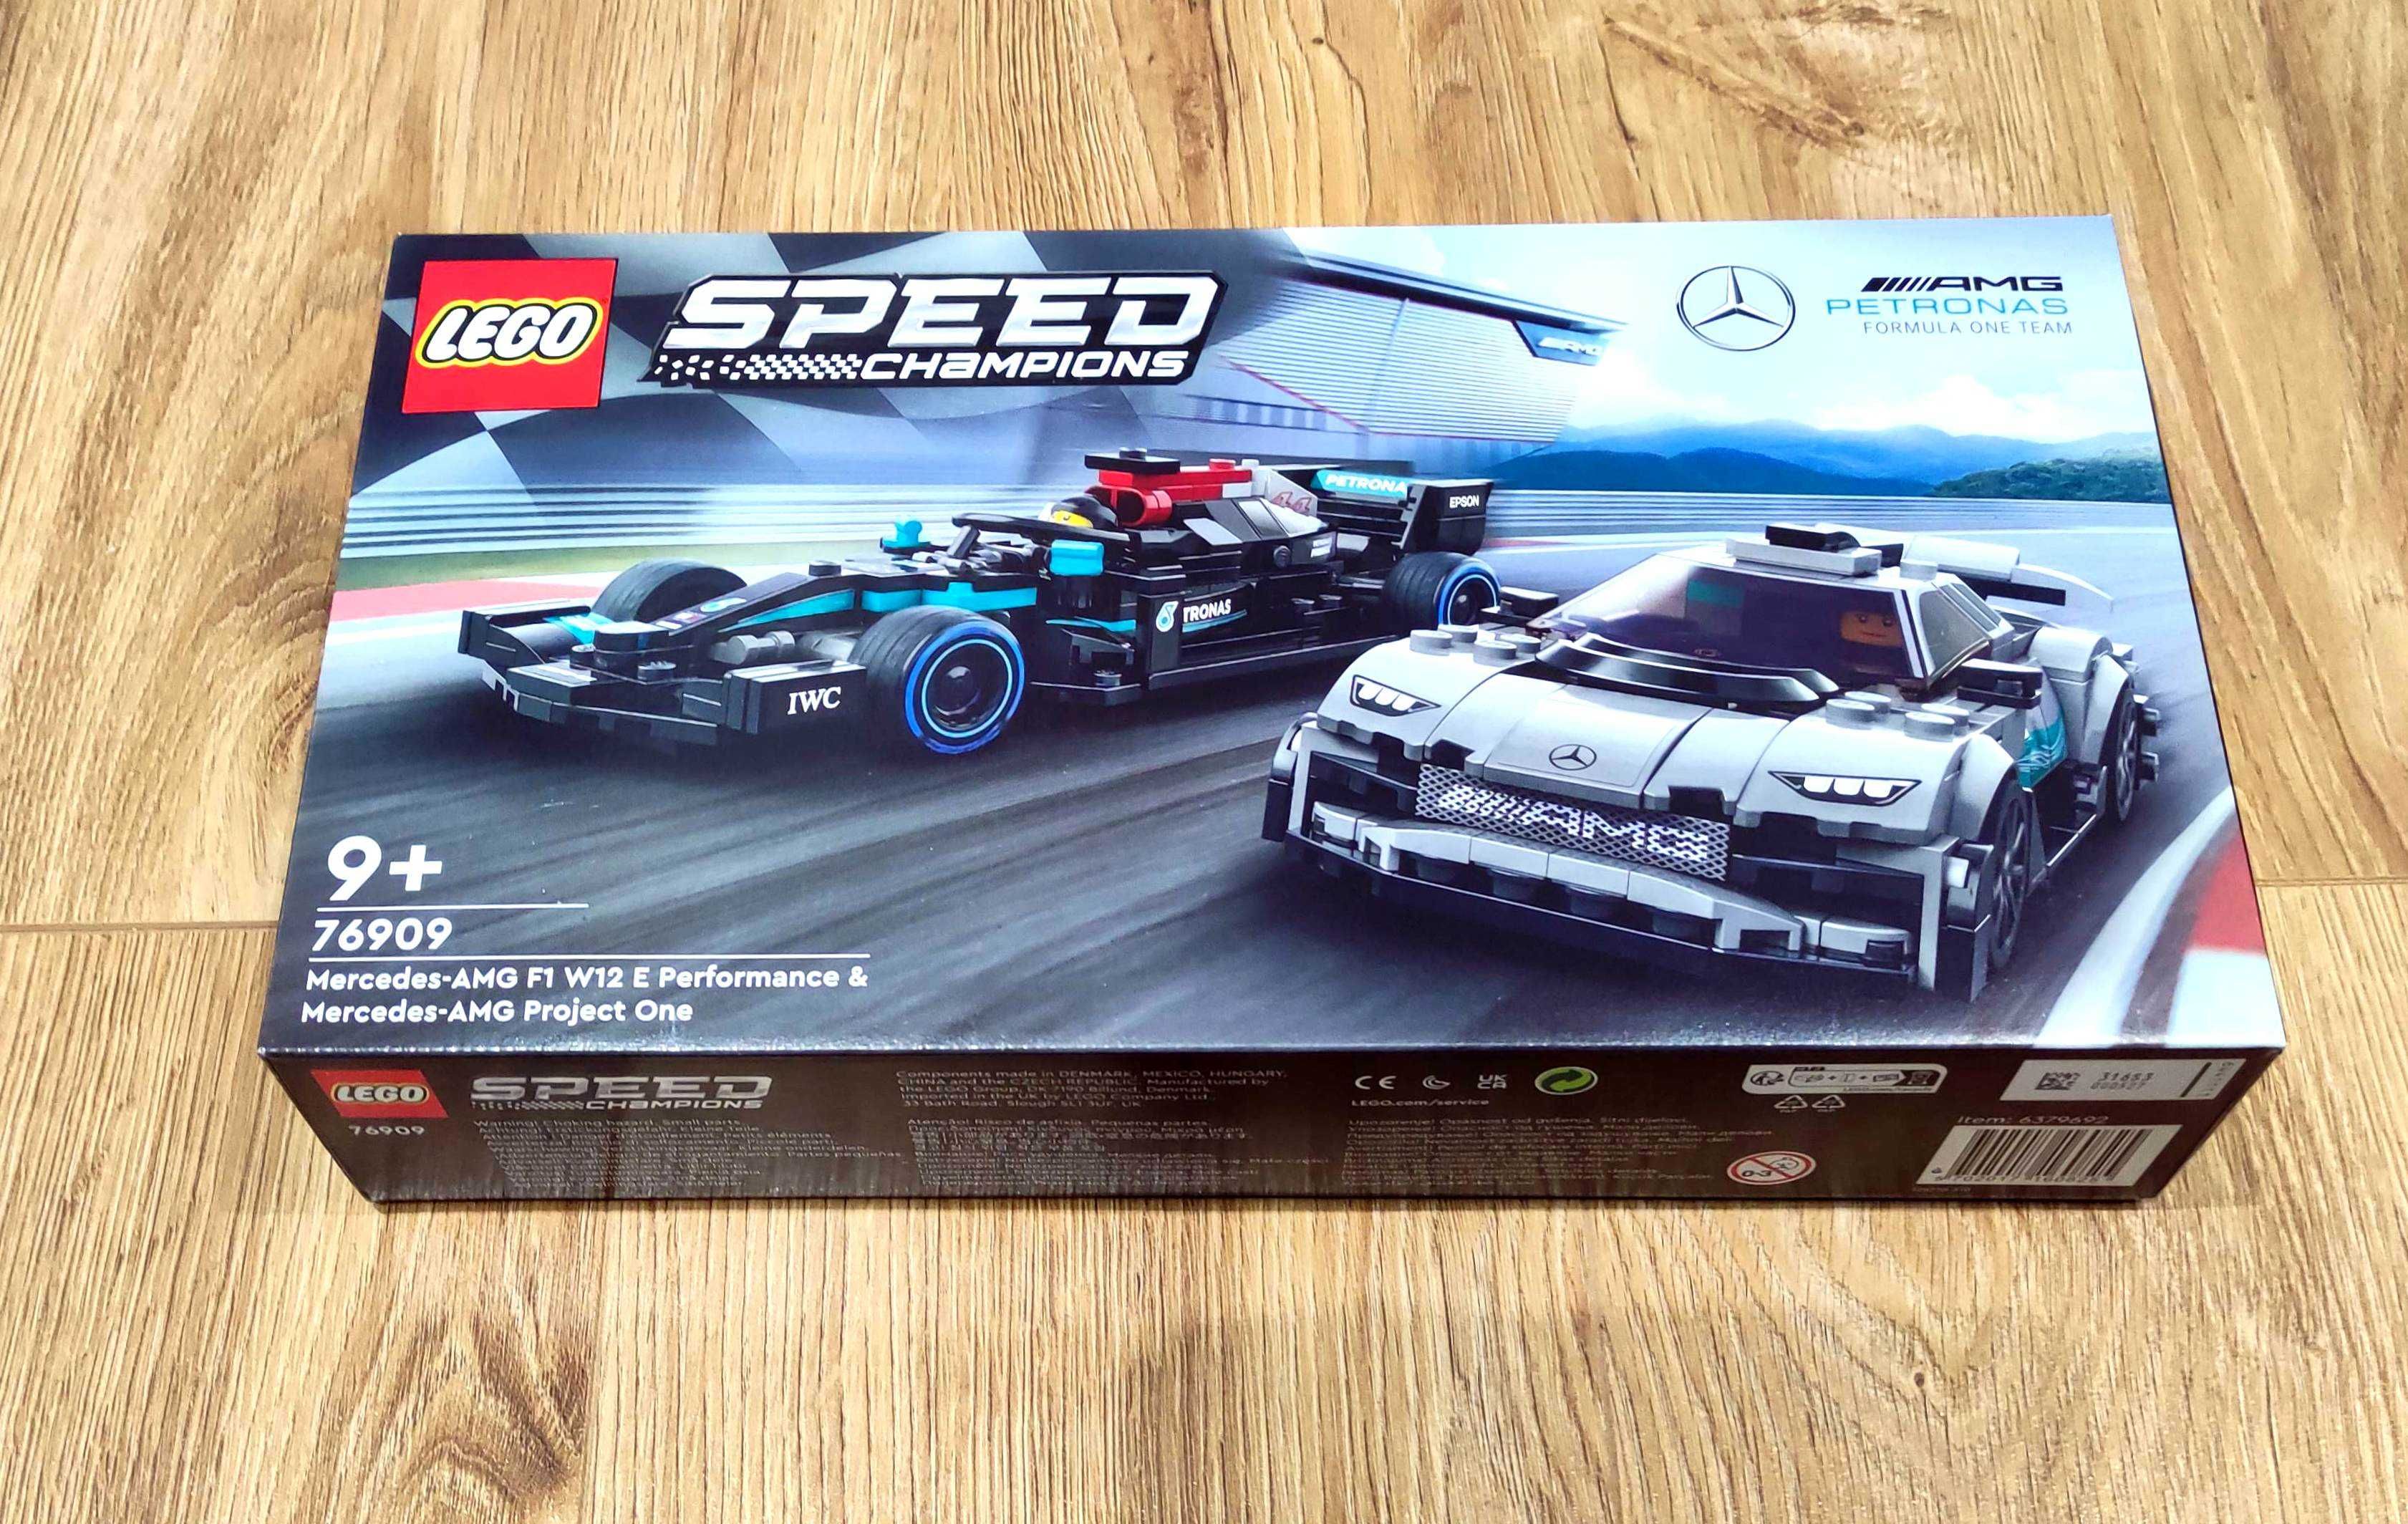 Lego 76909 Speed CHAMPIONS - nowy